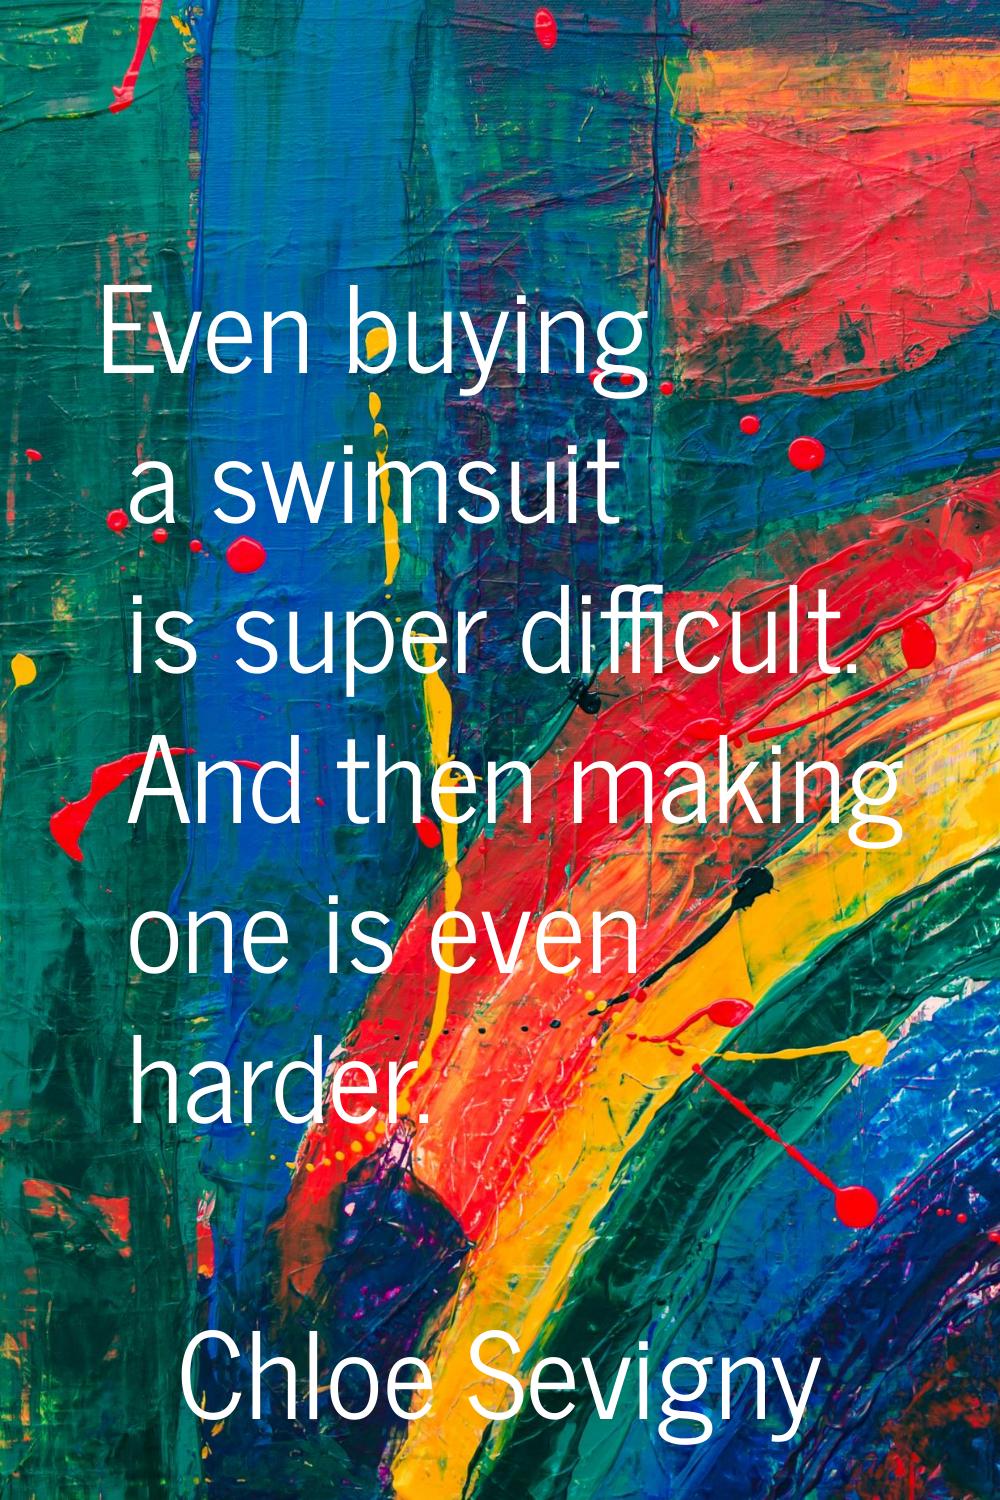 Even buying a swimsuit is super difficult. And then making one is even harder.